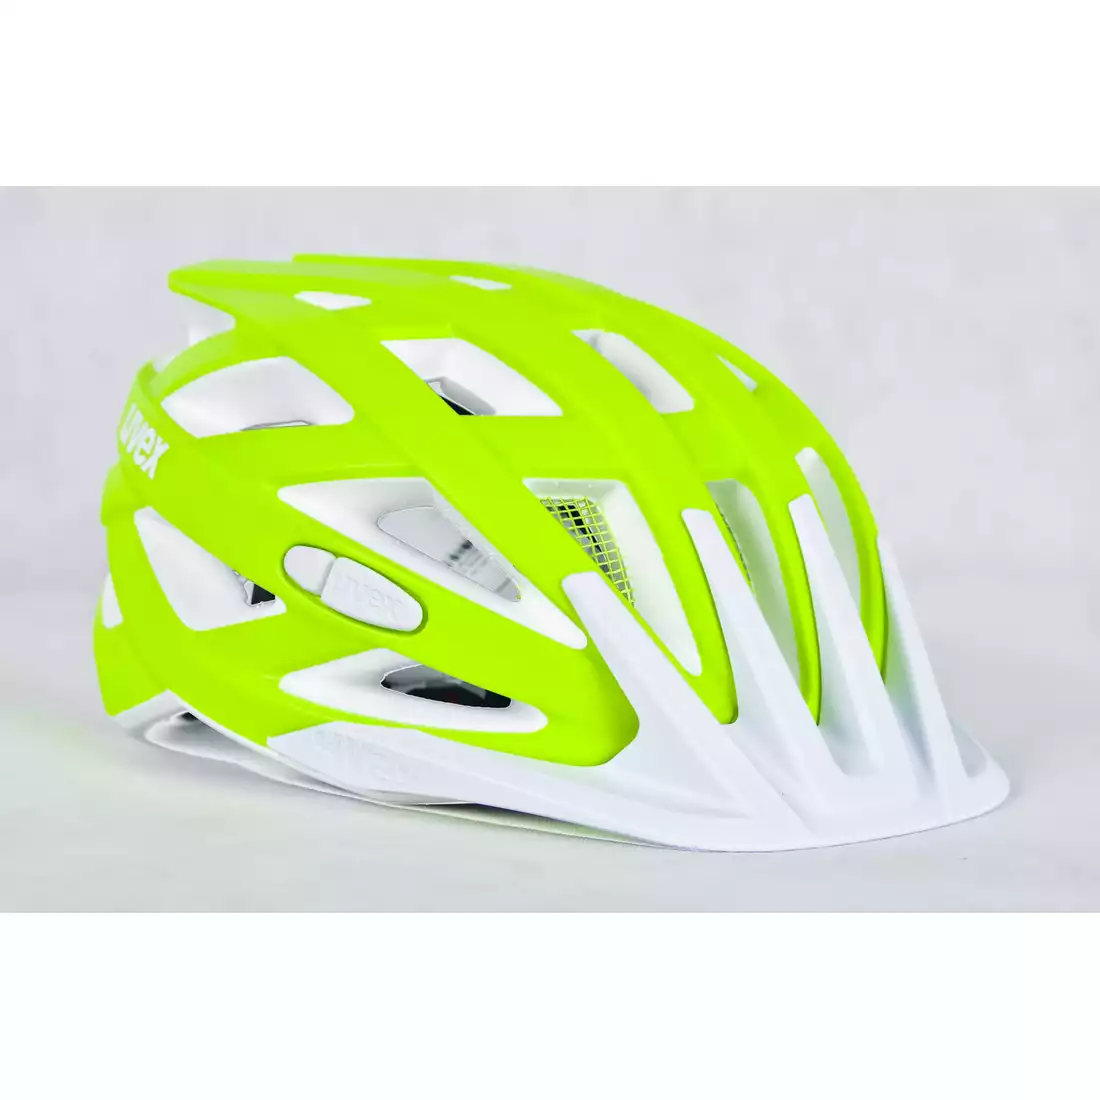 UVEX I-VO CC kask rowerowy 41042319 limonkowy mat